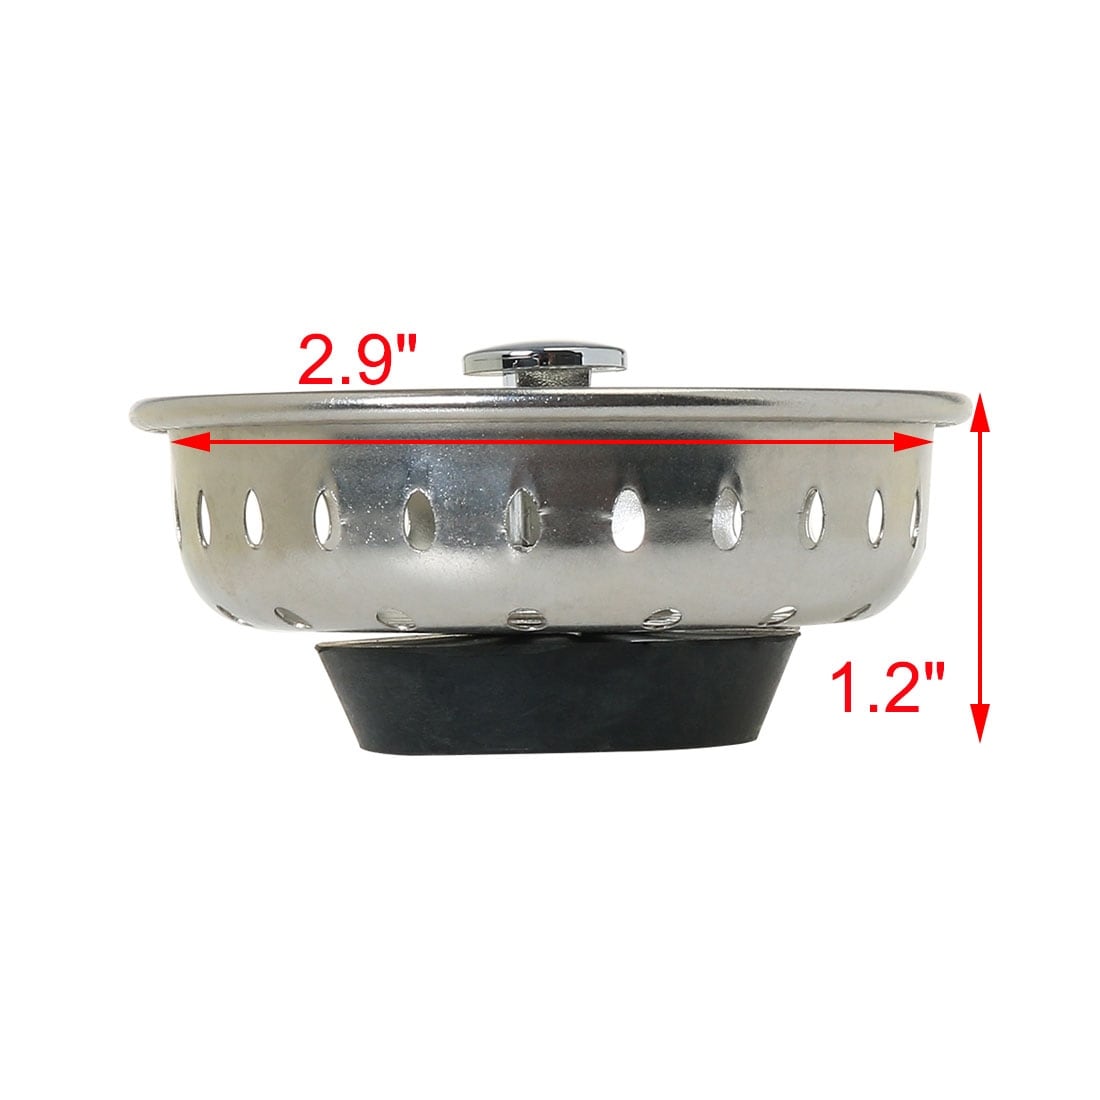 https://ak1.ostkcdn.com/images/products/is/images/direct/435dc0800f0564582569c6774cf10da796fdfadc/Kitchen-Basin-3.2%22-Dia-Stainless-Steel-Plug-Stopper-Sink-Strainer.jpg